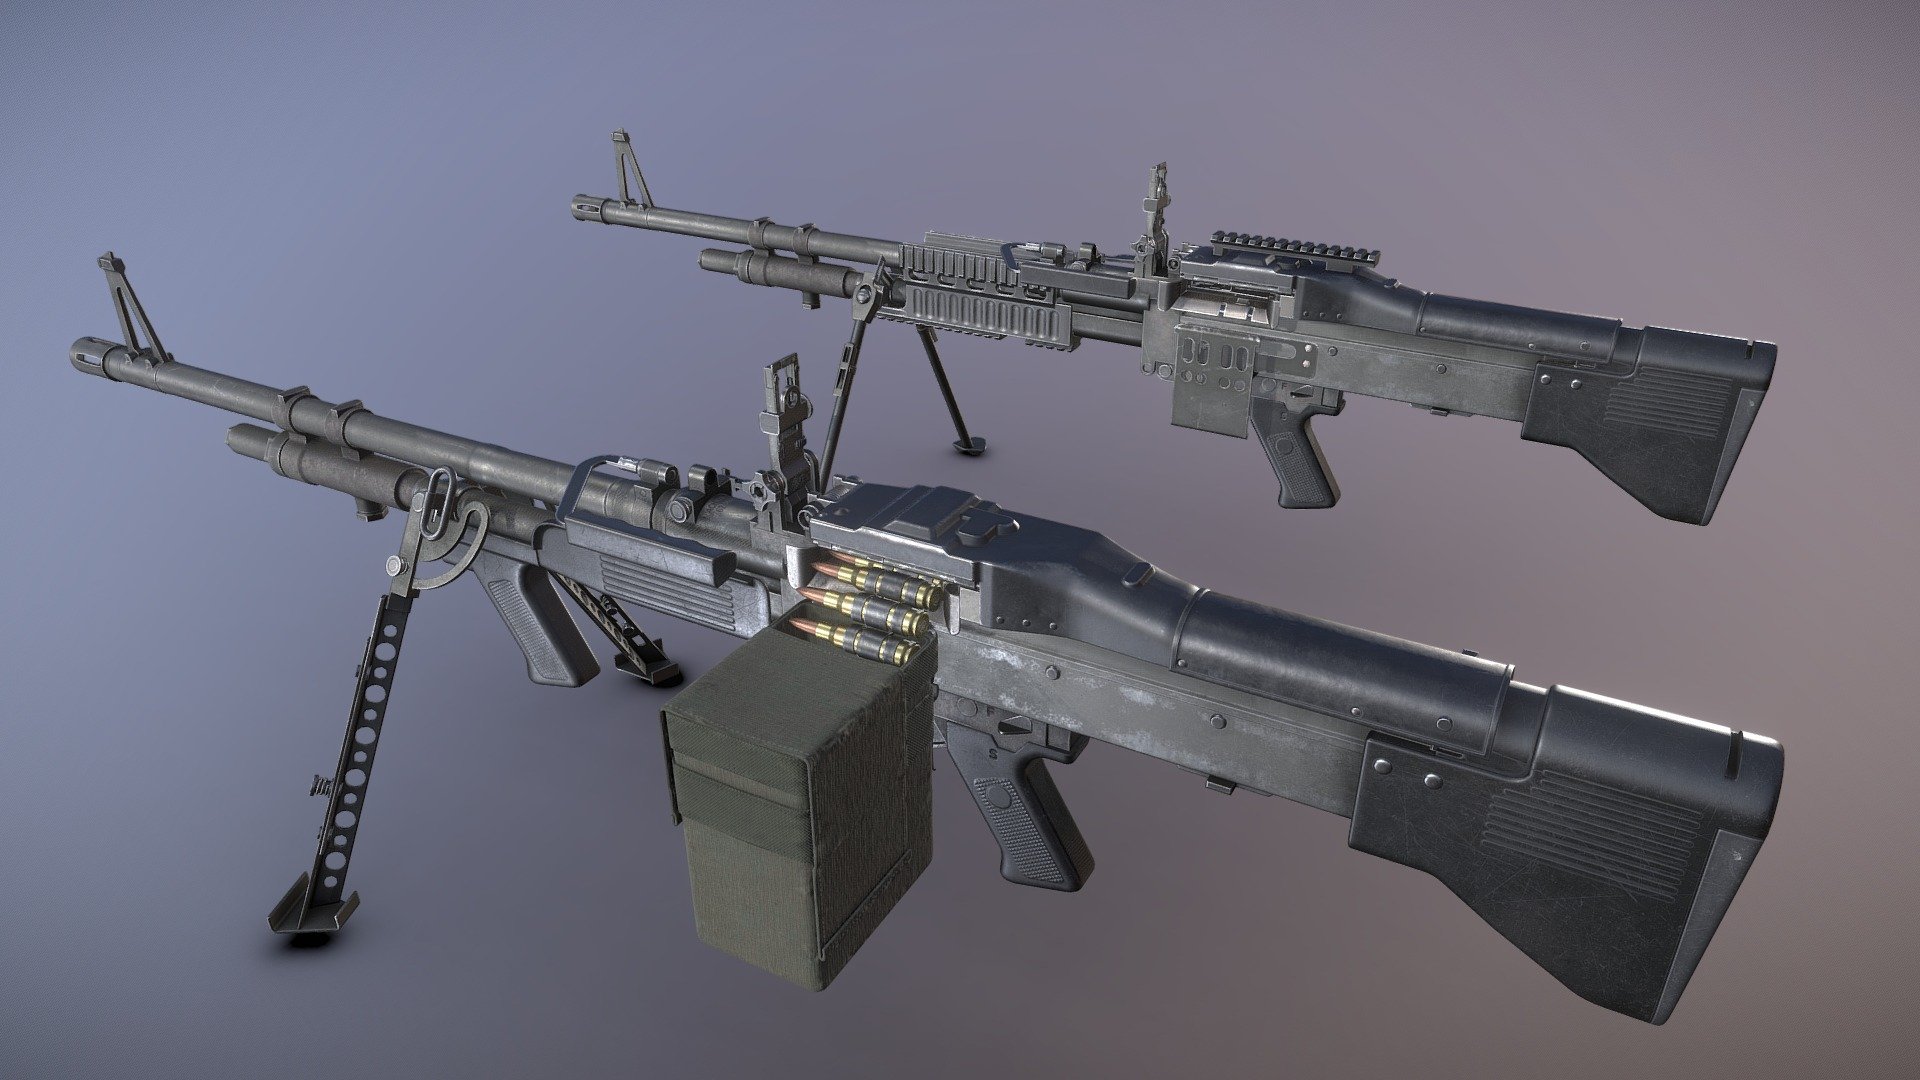 M60E3 and M60E4, modern updates to the original M60.

Originally modeled in 3ds Max 2019. Download includes .max, .fbx, .obj, metal/roughness PBR textures, textures for Unity and Unreal Engines, and additional texture maps such as curvature, AO, and color ID.

Specs




Scaled to approximate real world size (centimeters)

Mesh is in tris and quads, no n-gons.

Both guns share the same texture sheet

Animation




Ready for animation. Moveable parts include:

Bolt

Trigger

Top Cover

Bipod

Rear Sight Leaf

Rear Sight Notch

Charging Handle

Op Rod

Textures

3 Materials: 




4096x4096 Base Color, Roughness, Metallic, Normal, AO for the gun

2048x2048 PBR set for the ammo pouch

1024x1024 PBR set for M13 Link

512x512 PBR set for the 7.62x51mm cartridge

Unity Engine 5 Textures: AlbedoTransparency, MetallicSmoothness, Normal, Occlusion

Unreal Engine 4 Textures: BaseColor, Normal, RoughnessMetallicAO - M60E3 and M60E4 - 3D model by Luchador (@Luchador90) 3d model